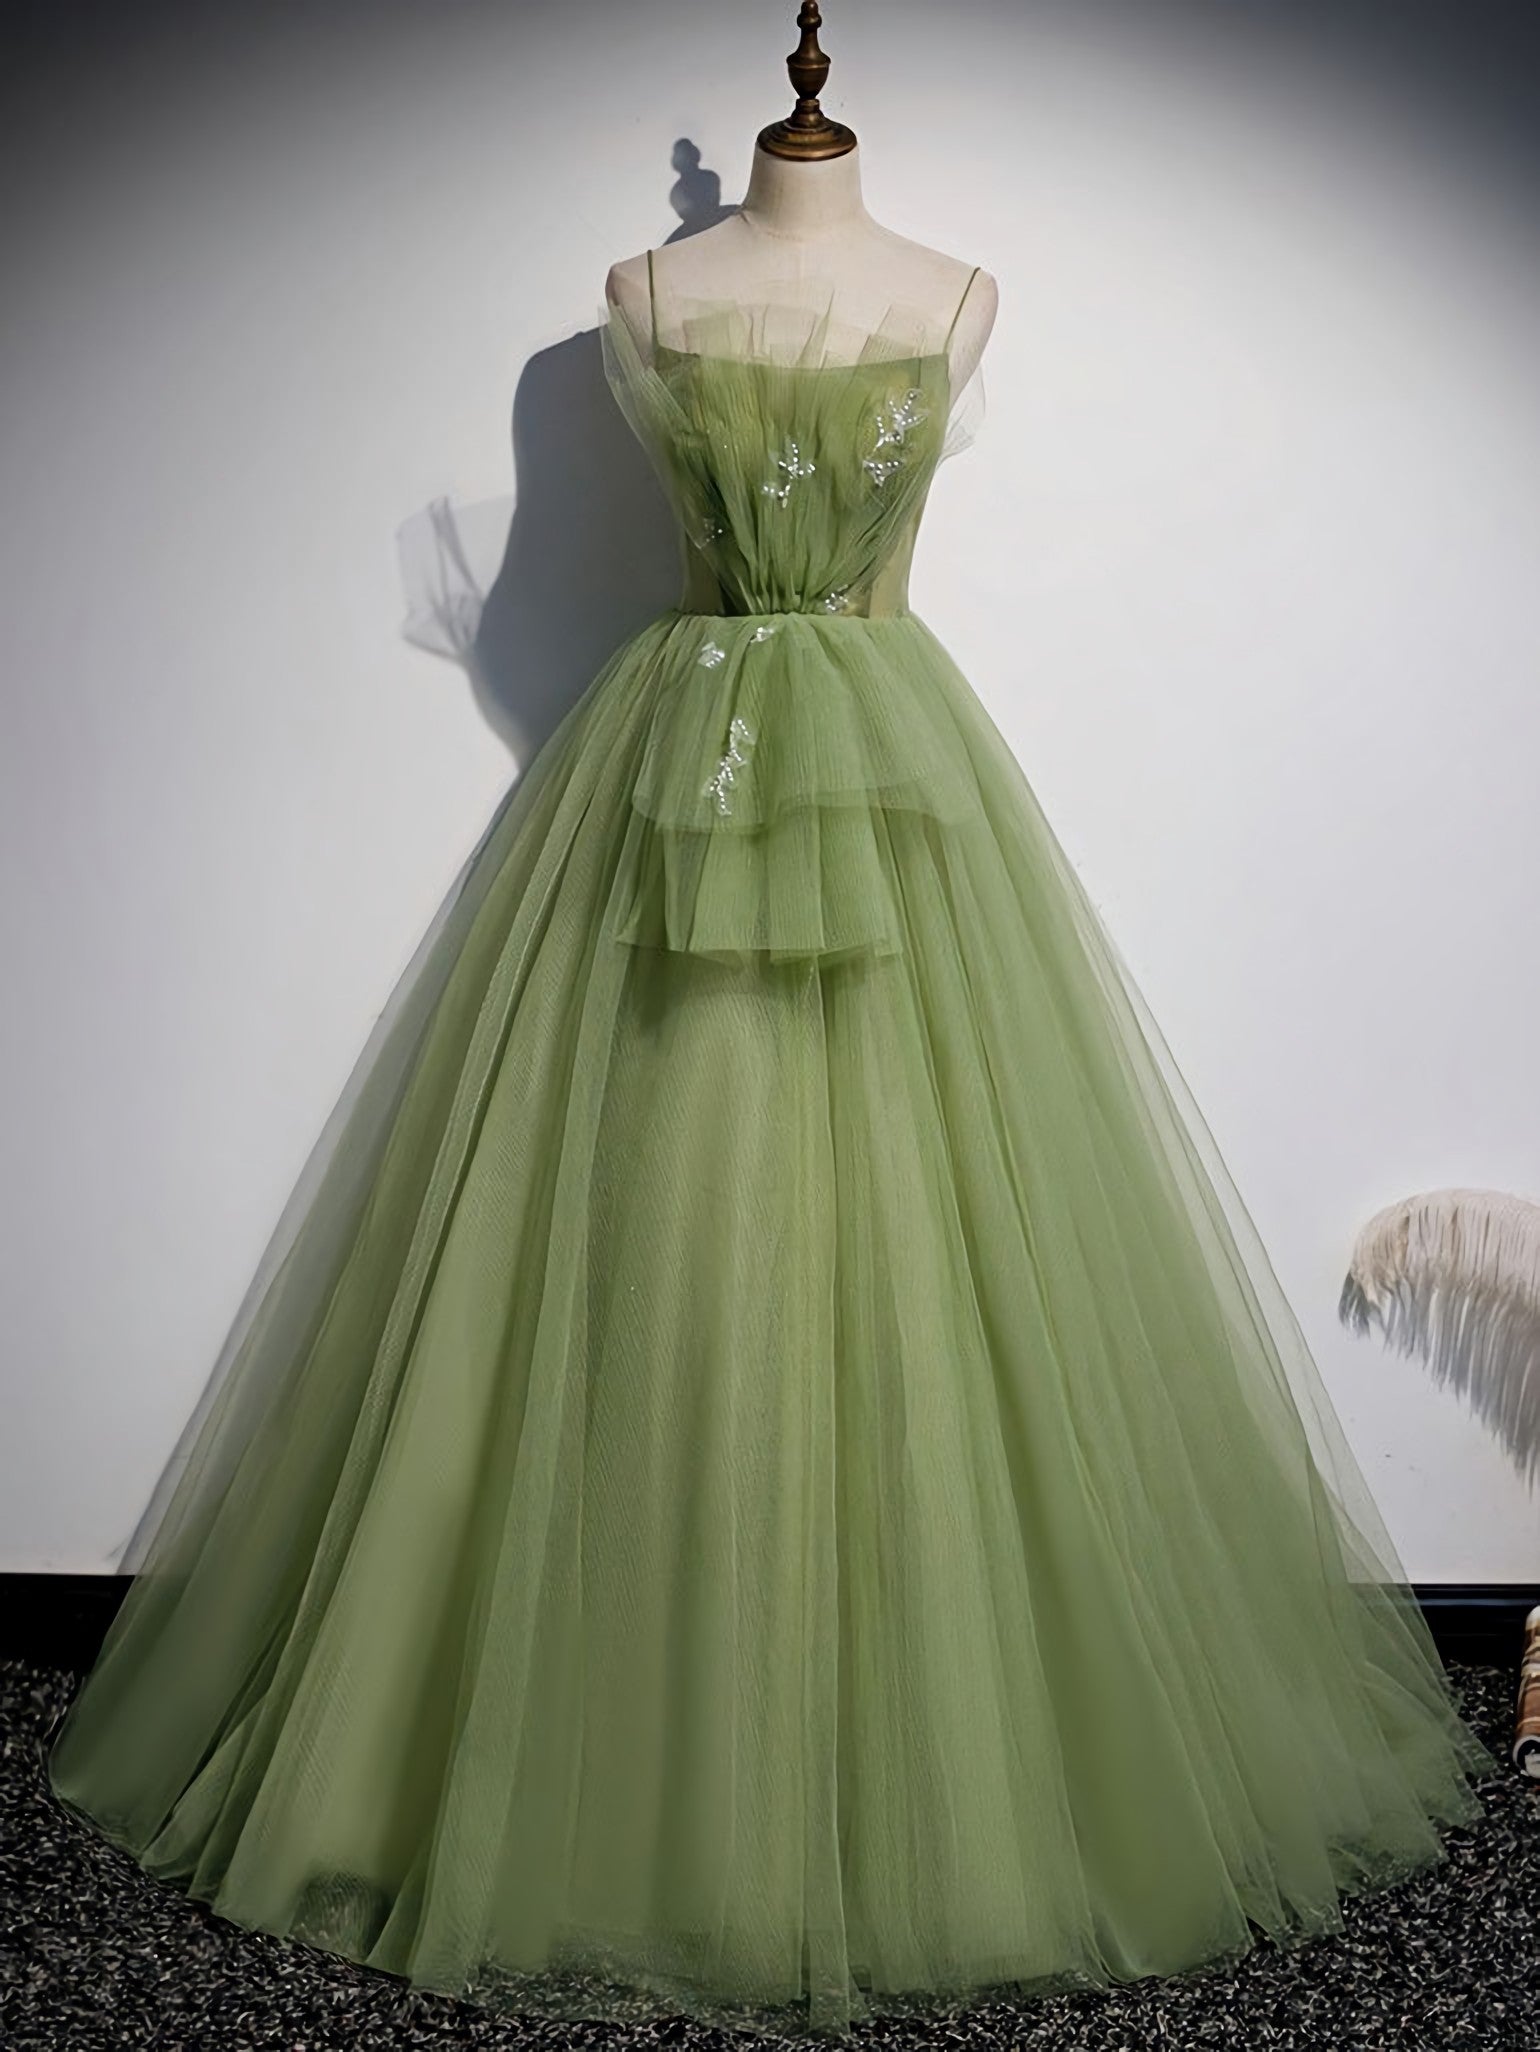 Green Tulle Long Corset Prom Dress, Green Tulle Corset Formal Dress outfit, Evening Dress Elegant Classy